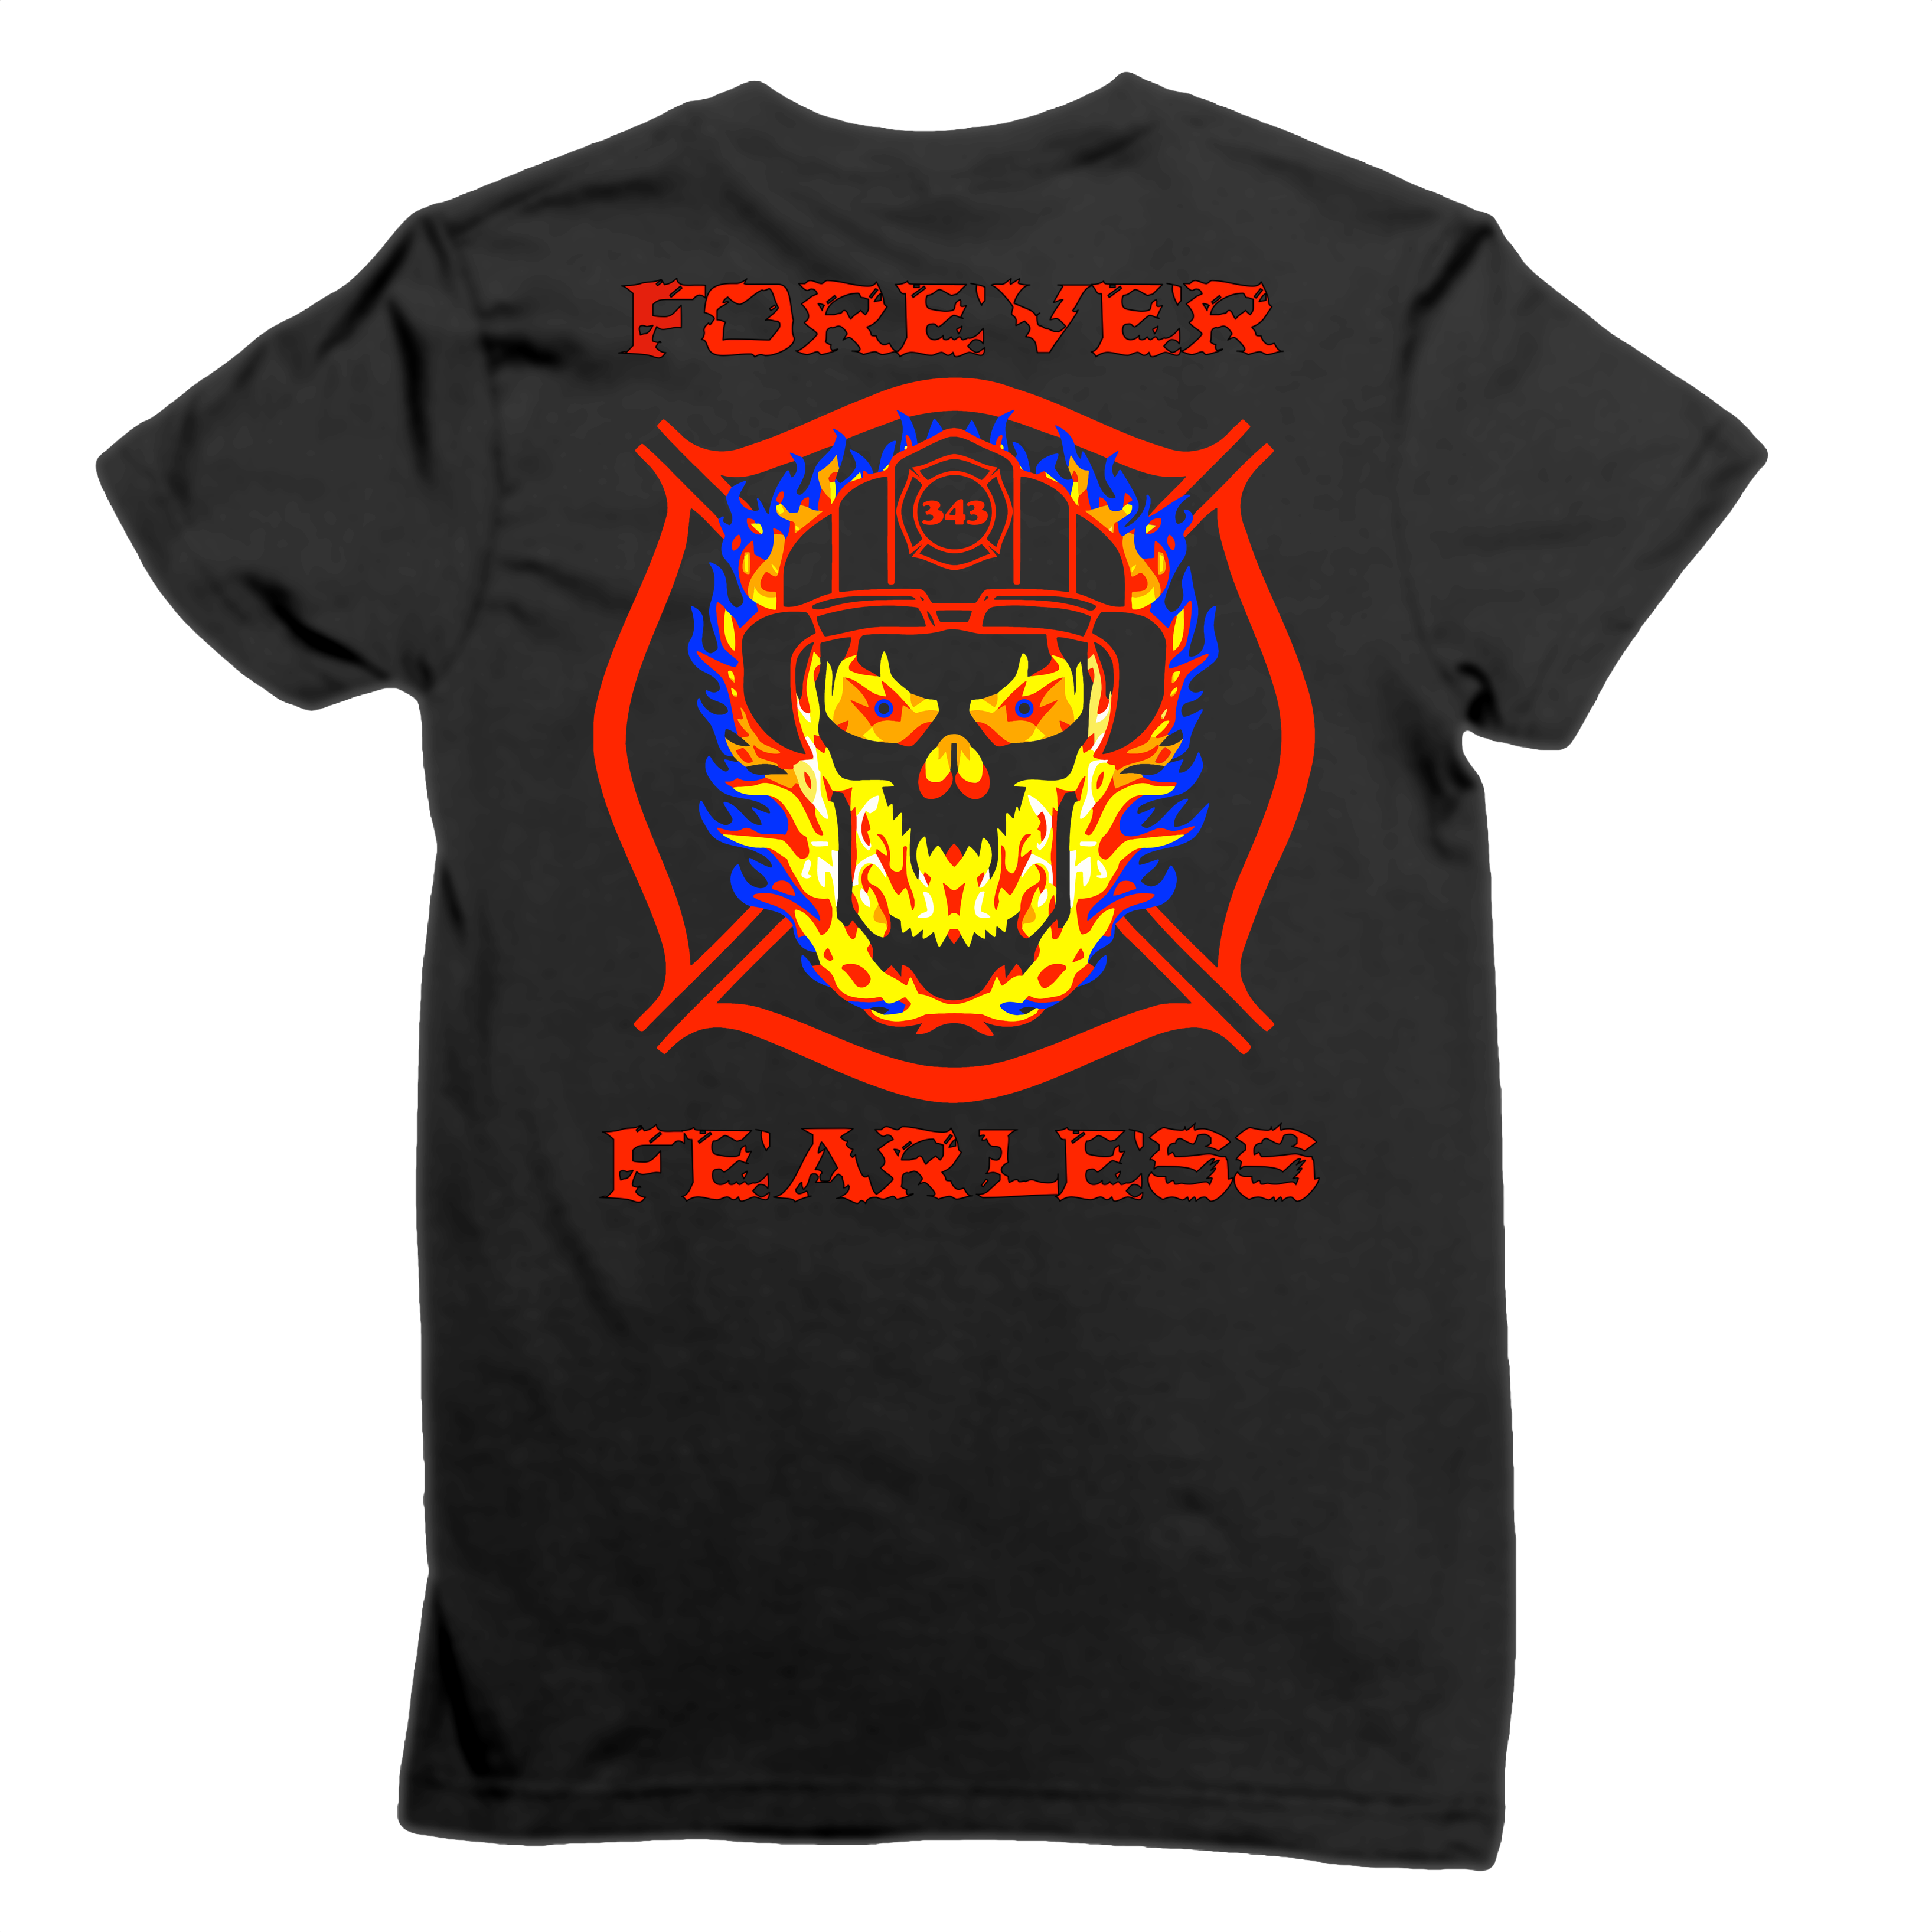 FOREVER FEARLESS – T-Shirt (Men’s) | Rescue Life 777